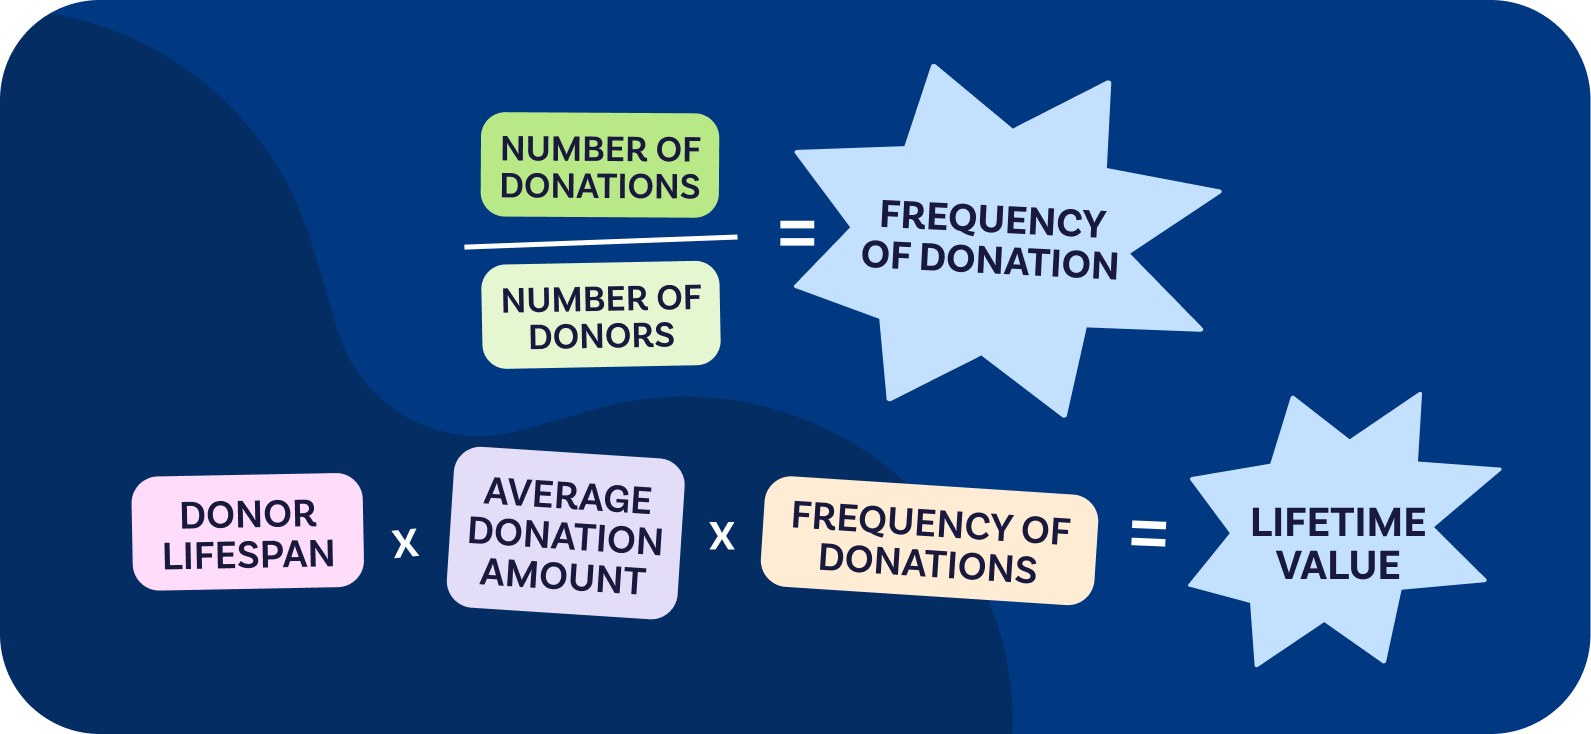 How to calculate frequency of donation and lifetime value.